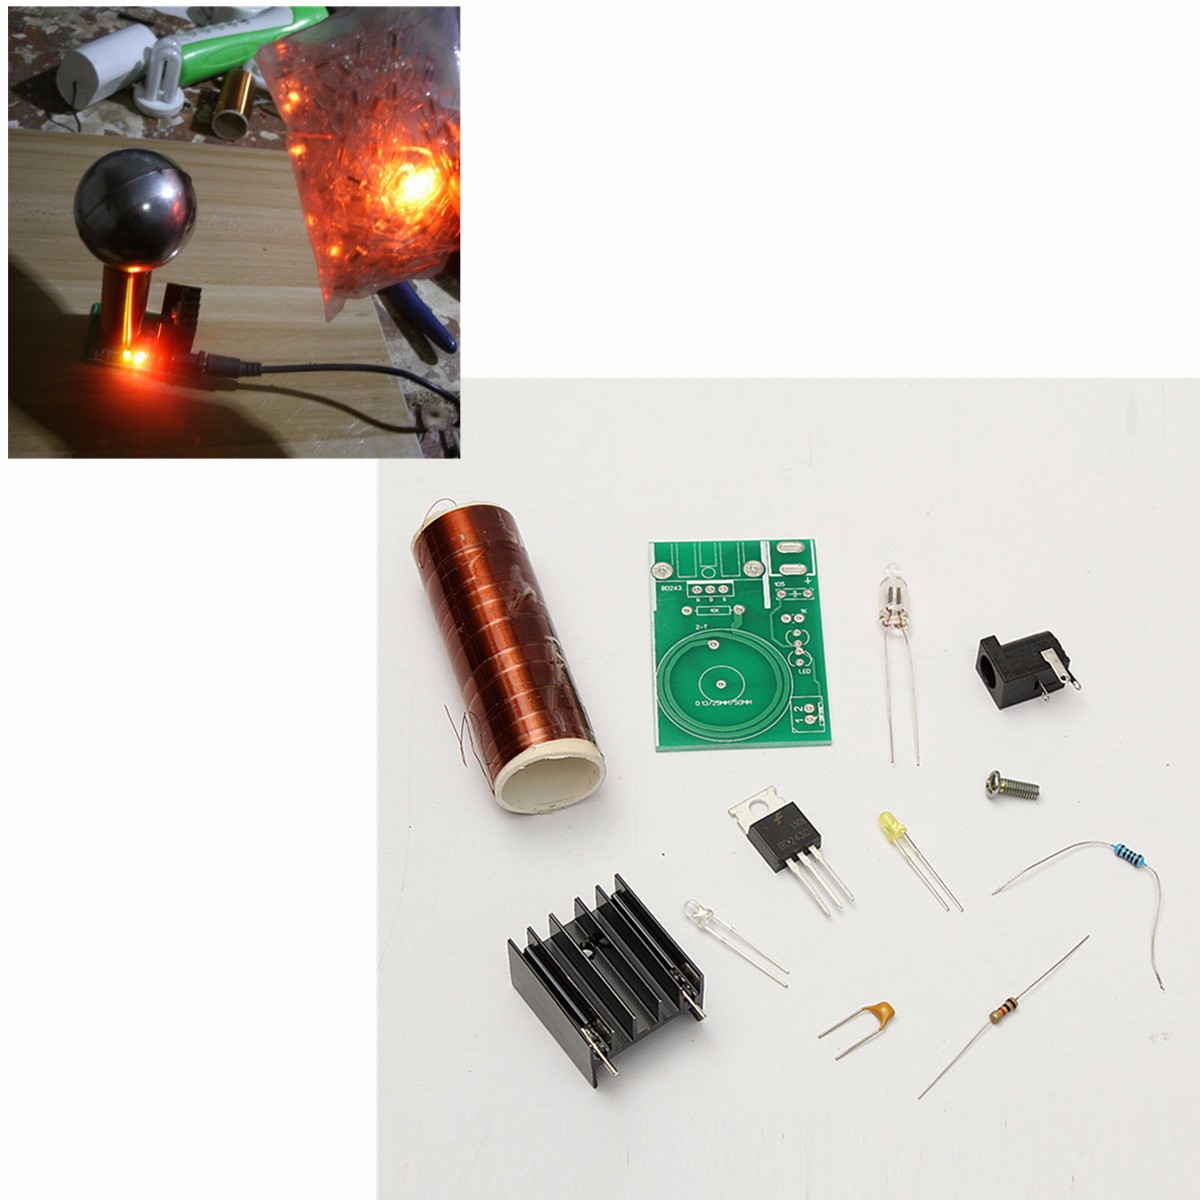 no Arc only Light Tesla Coil,Mini Tesla Coil for Dry Battery Powered,No Arc Remote Ignition Tesla Electronic DIY Kit,no Electricity finished